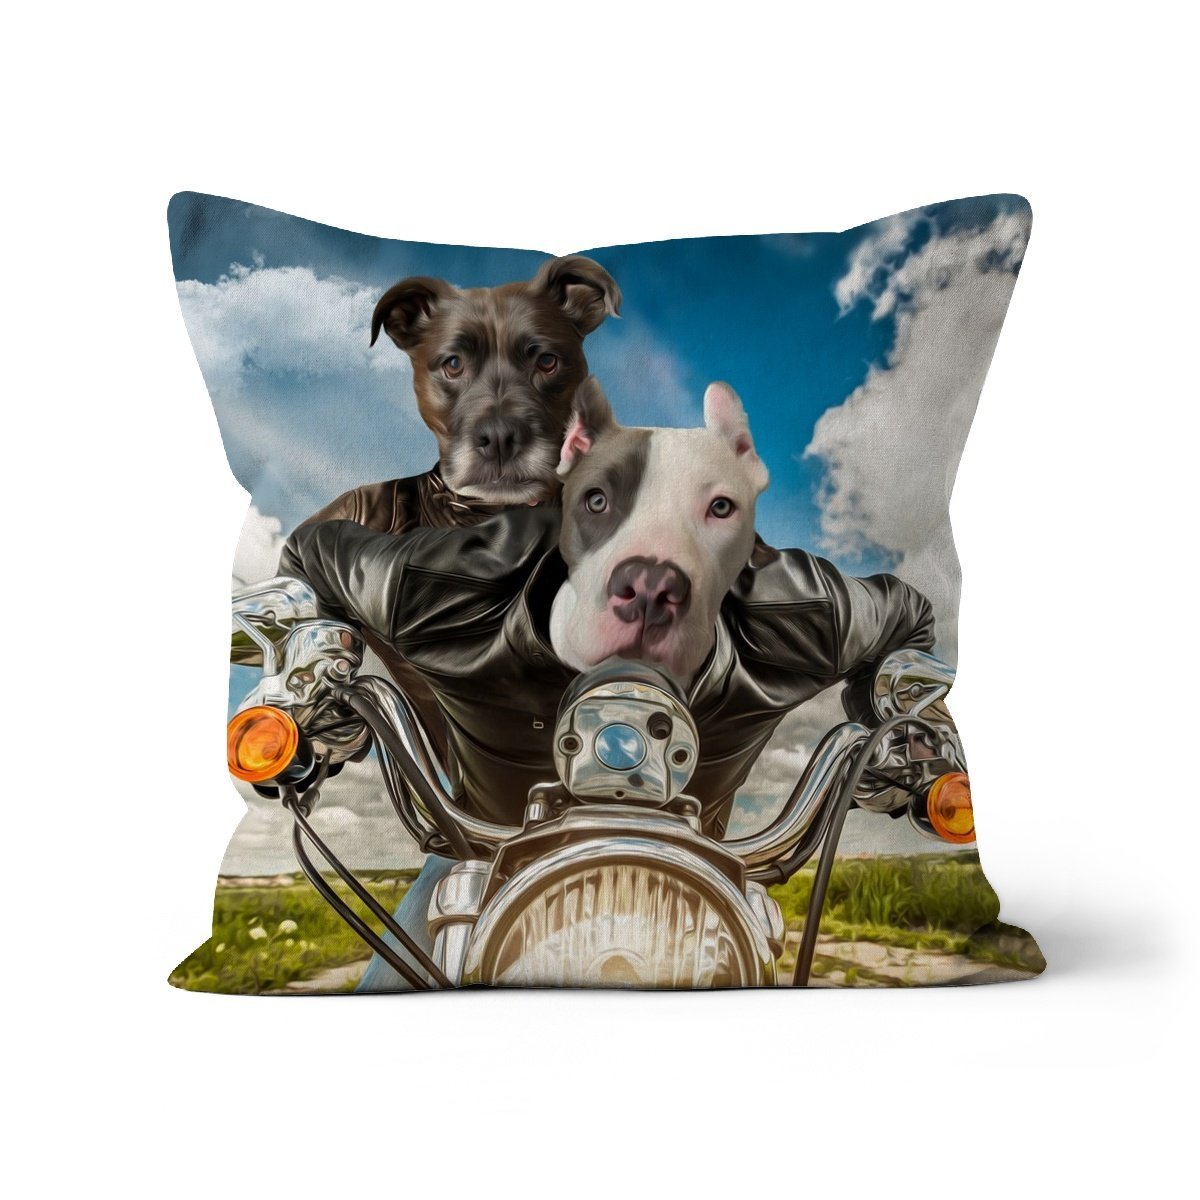 Harley Woofingson: Custom Pet Throw Pillow - Paw & Glory - #pet portraits# - #dog portraits# - #pet portraits uk#paw and glory, pet portraits cushion,dog on pillow, custom cat pillows, pet pillow, custom pillow of pet, pillow personalized